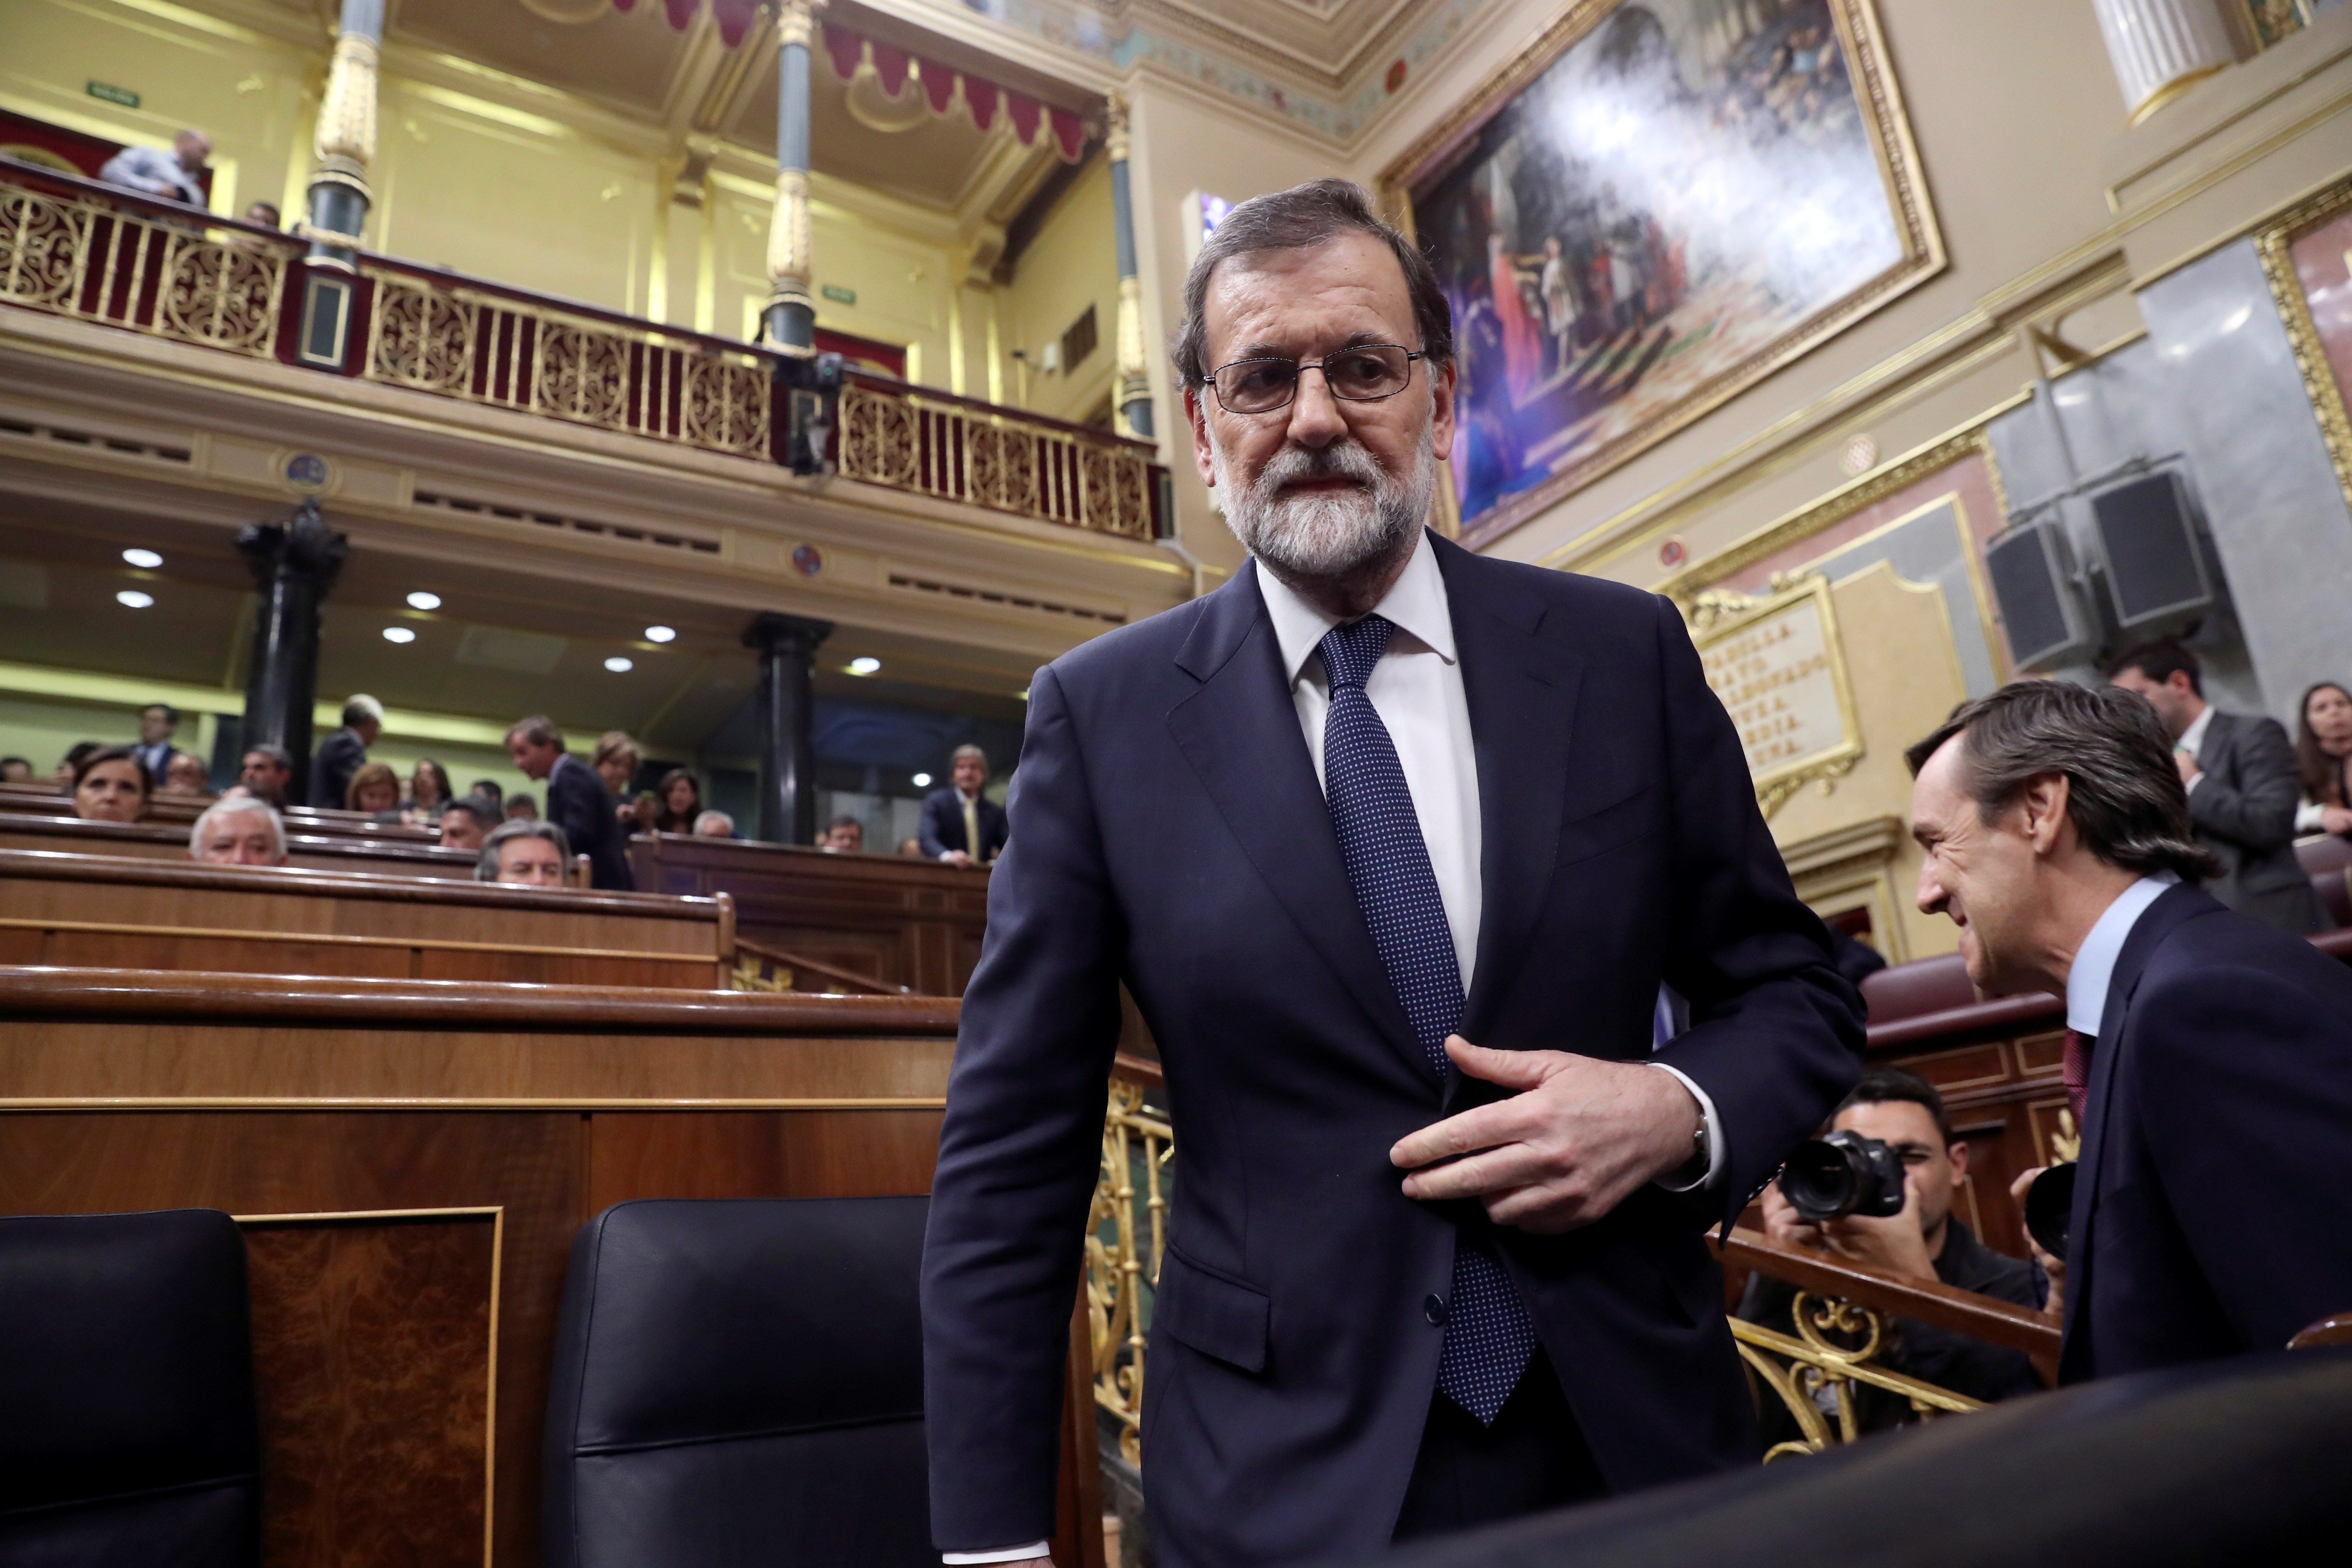 Rajoy rejects Puigdemont's proposal: "Mediation is not possible between the law and disobedience"